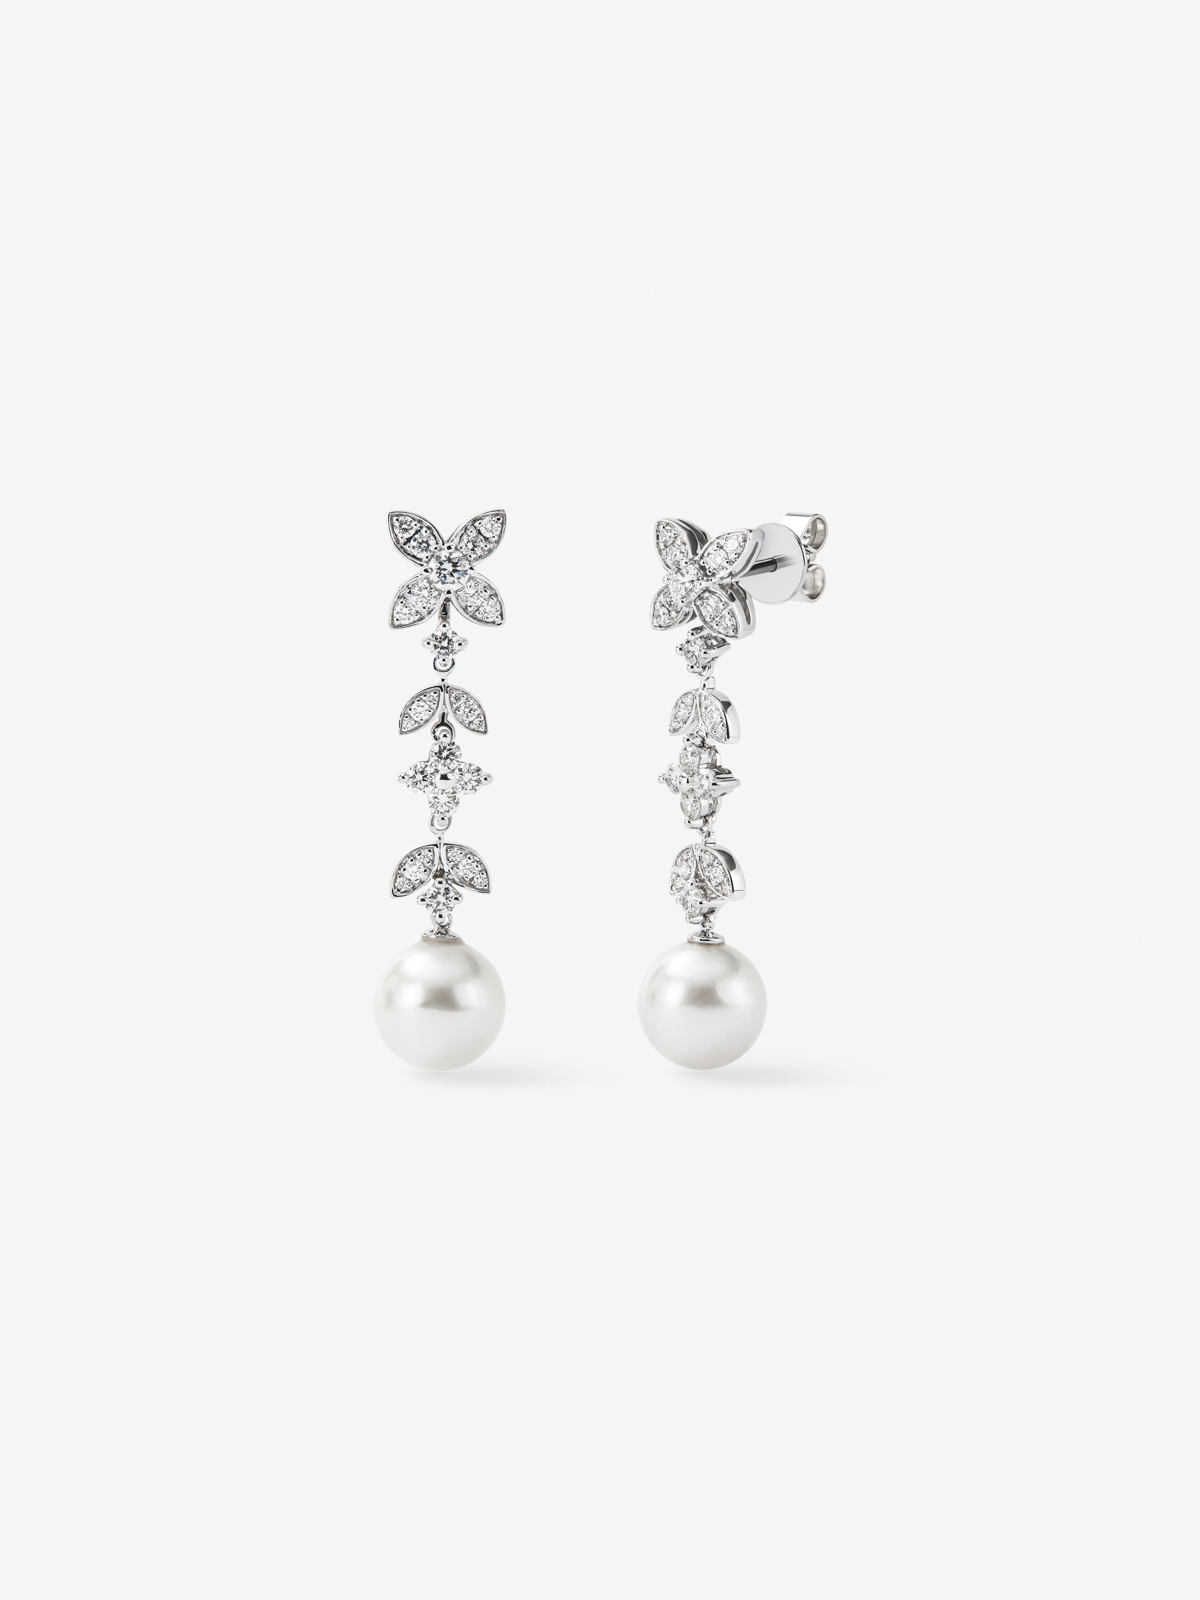 Detachable 18K white gold earrings with 0.99 ct brilliant-cut diamonds and 8.5 mm pearls